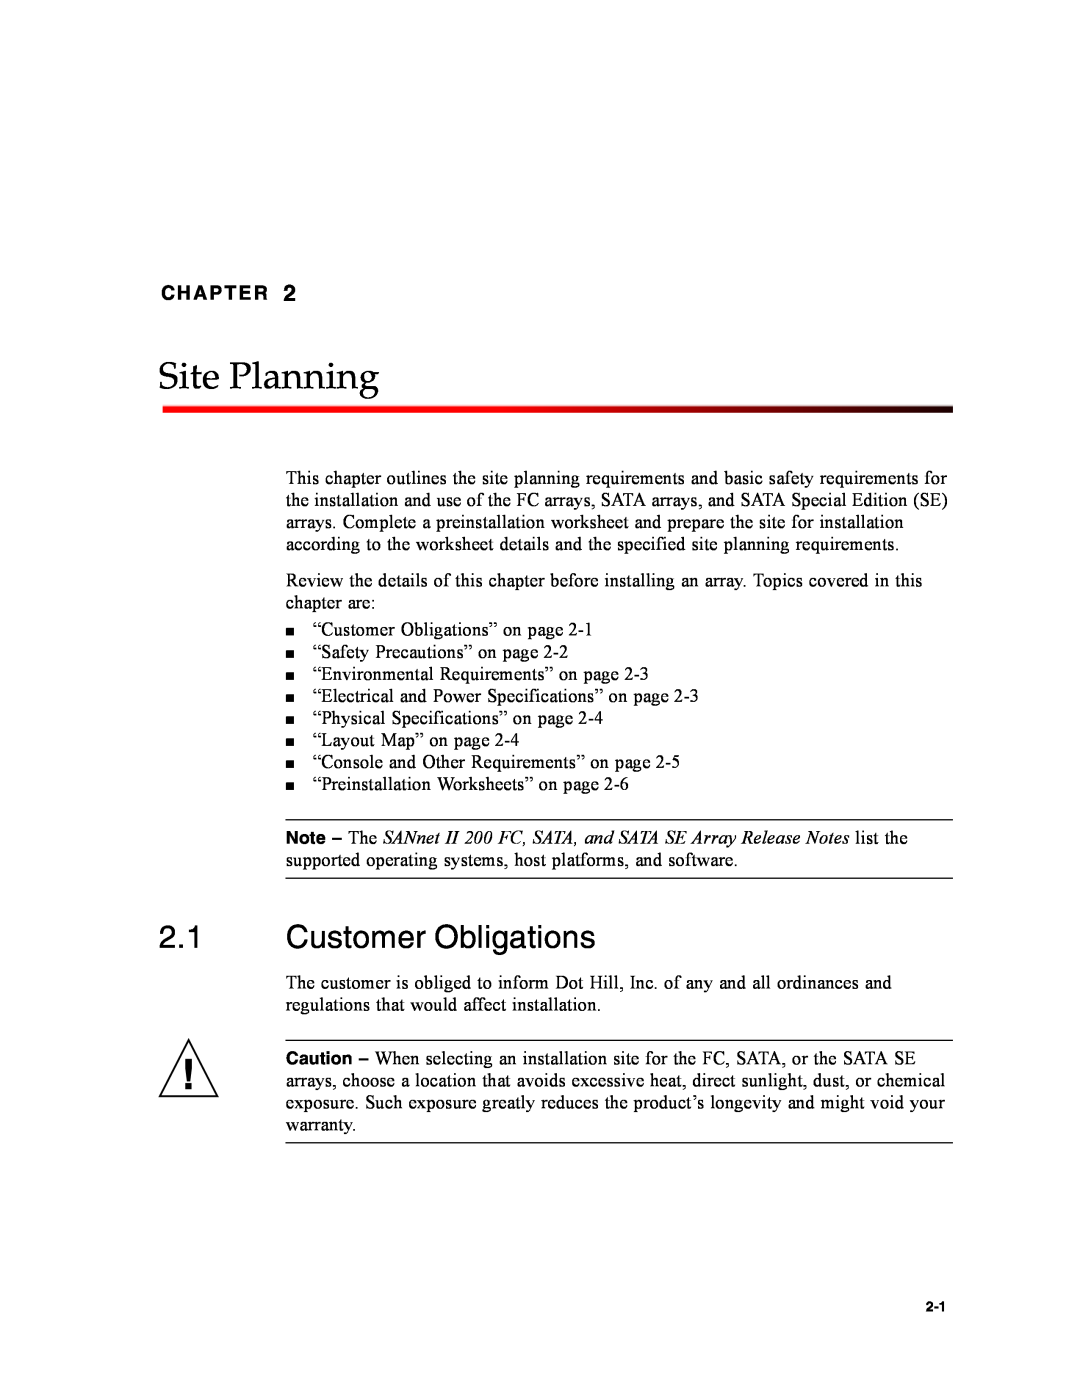 Dot Hill Systems II 200 FC service manual Site Planning, Customer Obligations, Chapter 